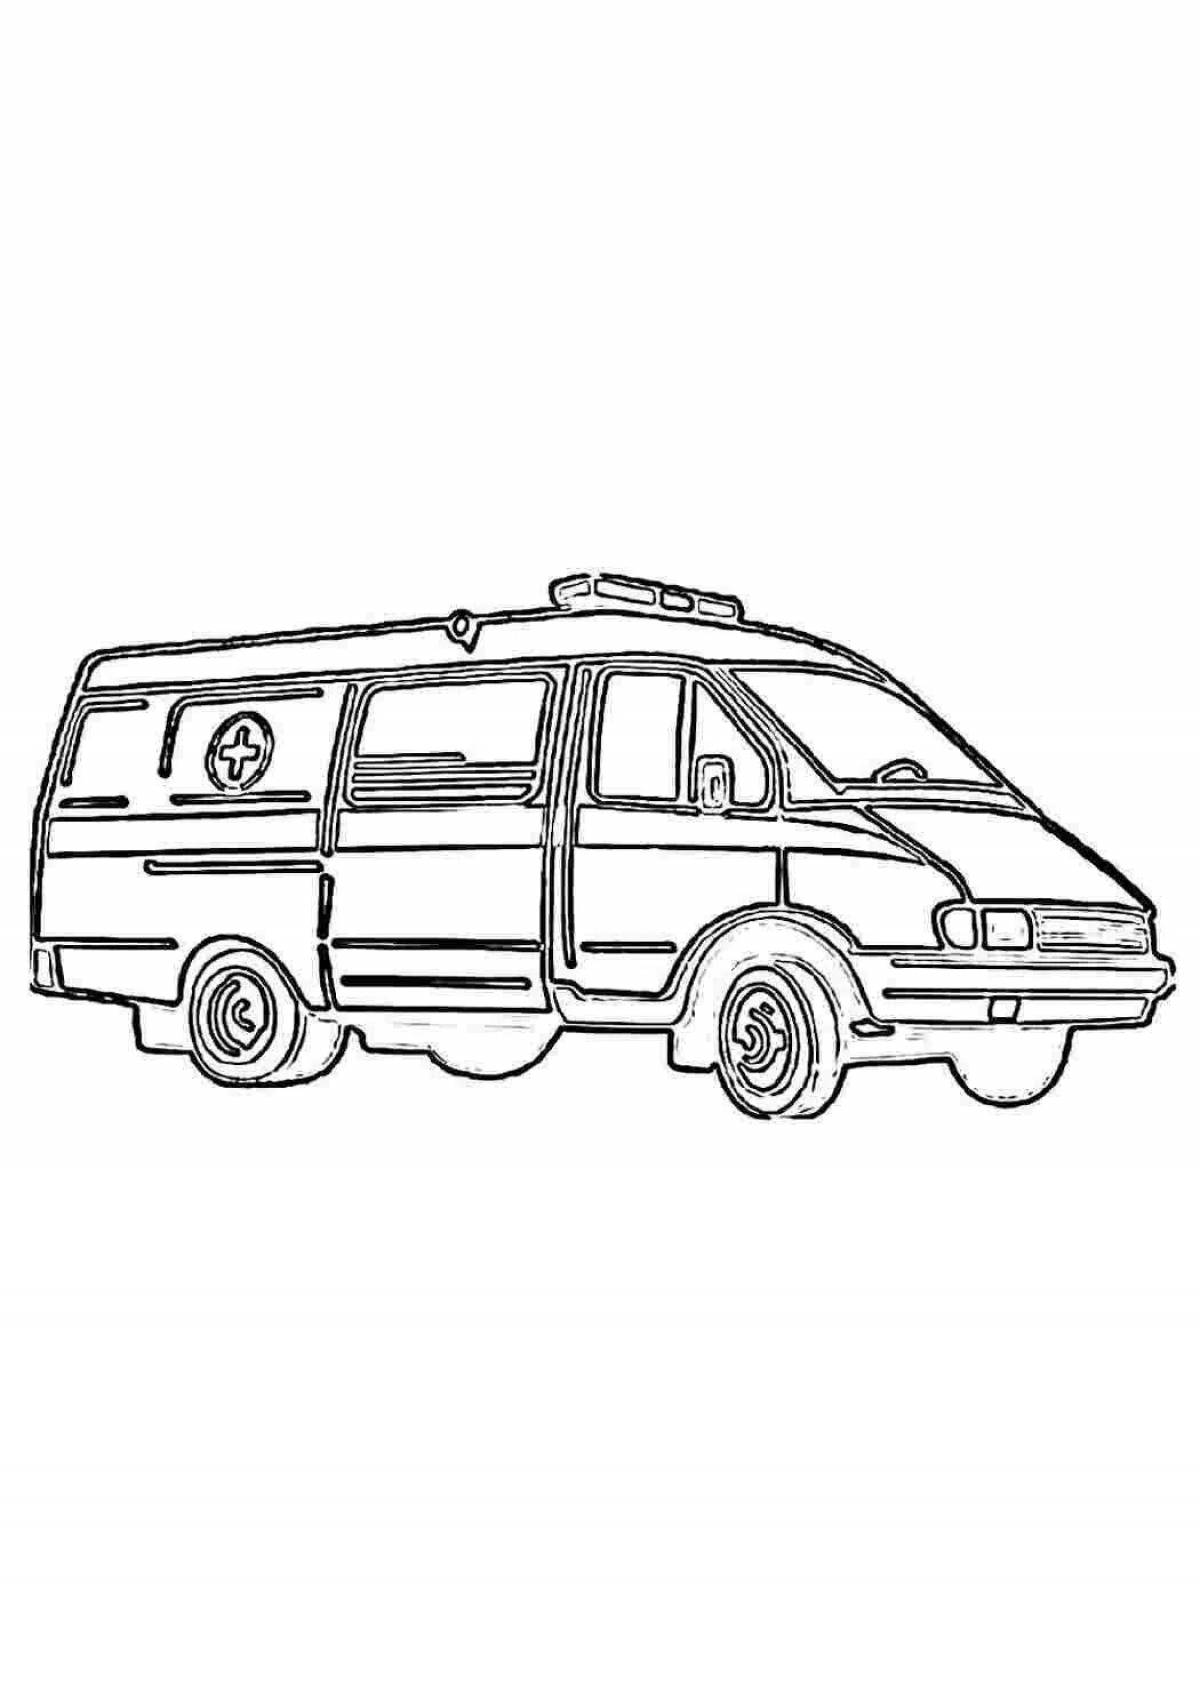 Coloring page dazzling company cars